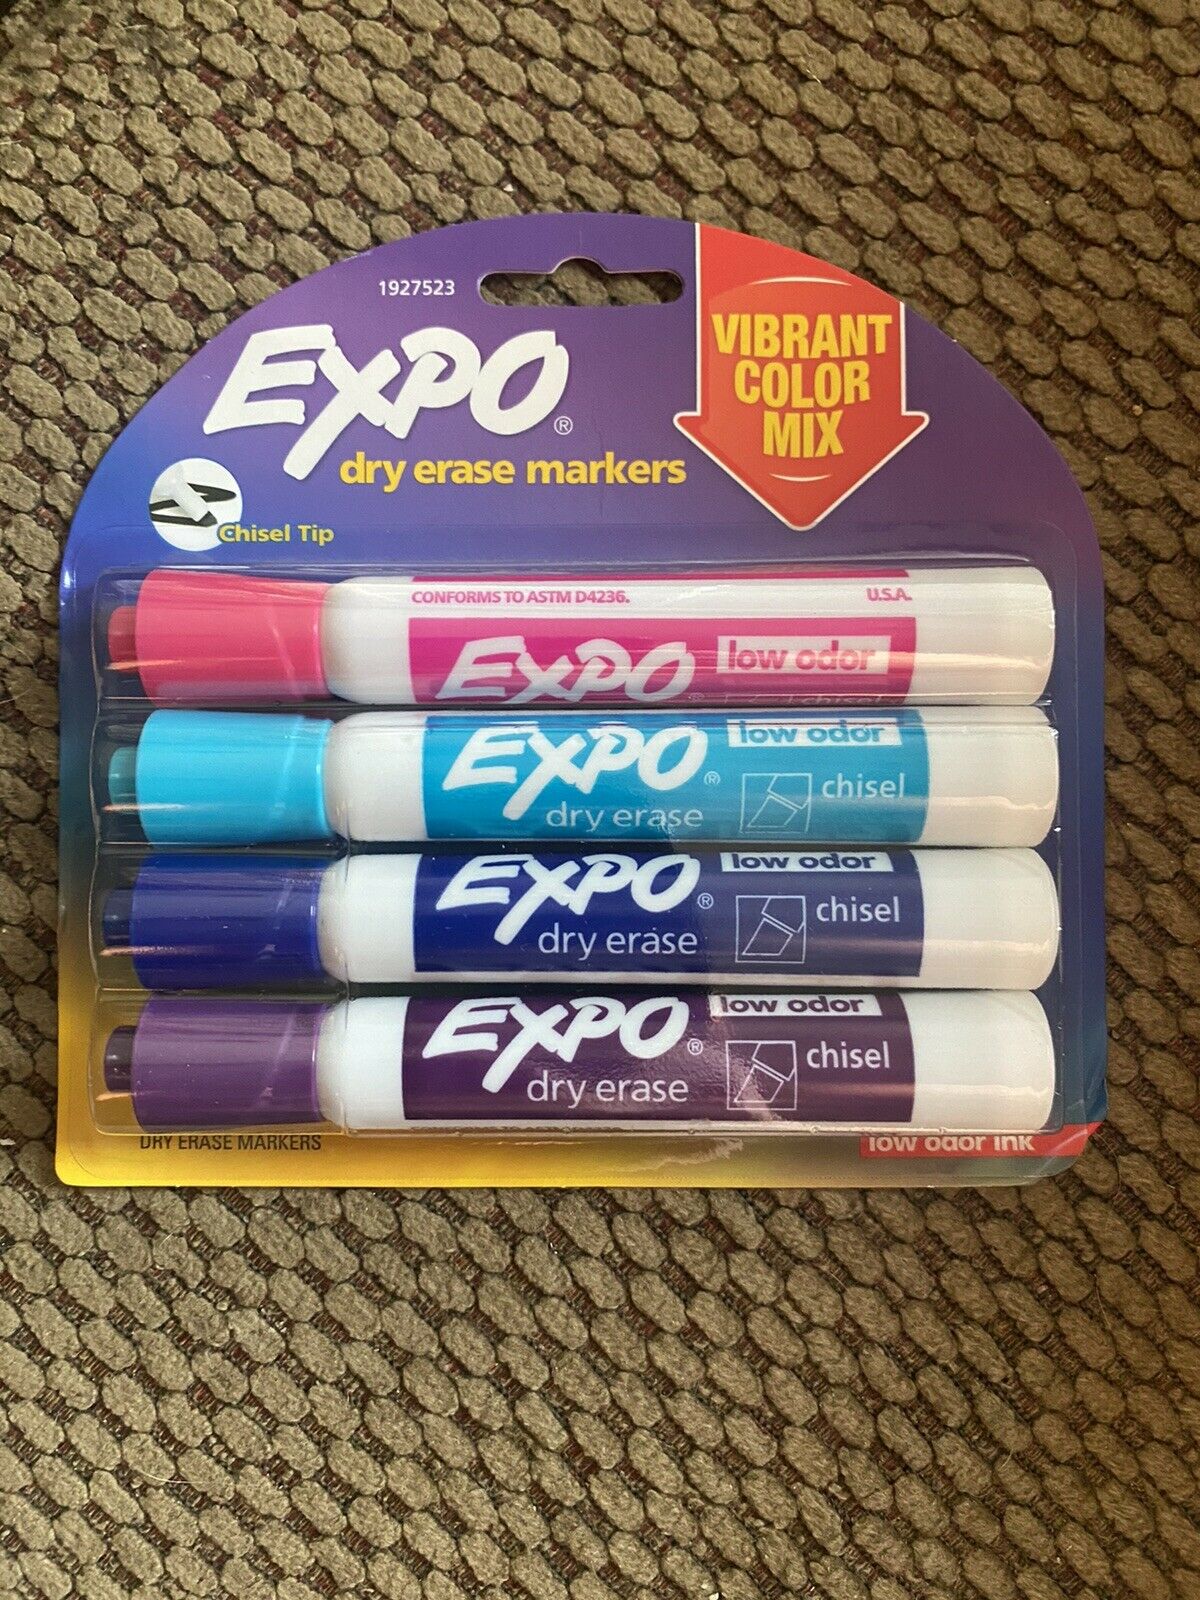 EXPO 1927523 Low-Odor Dry Erase Markers, Chisel Tip, Vibrant Colors, 4-Count